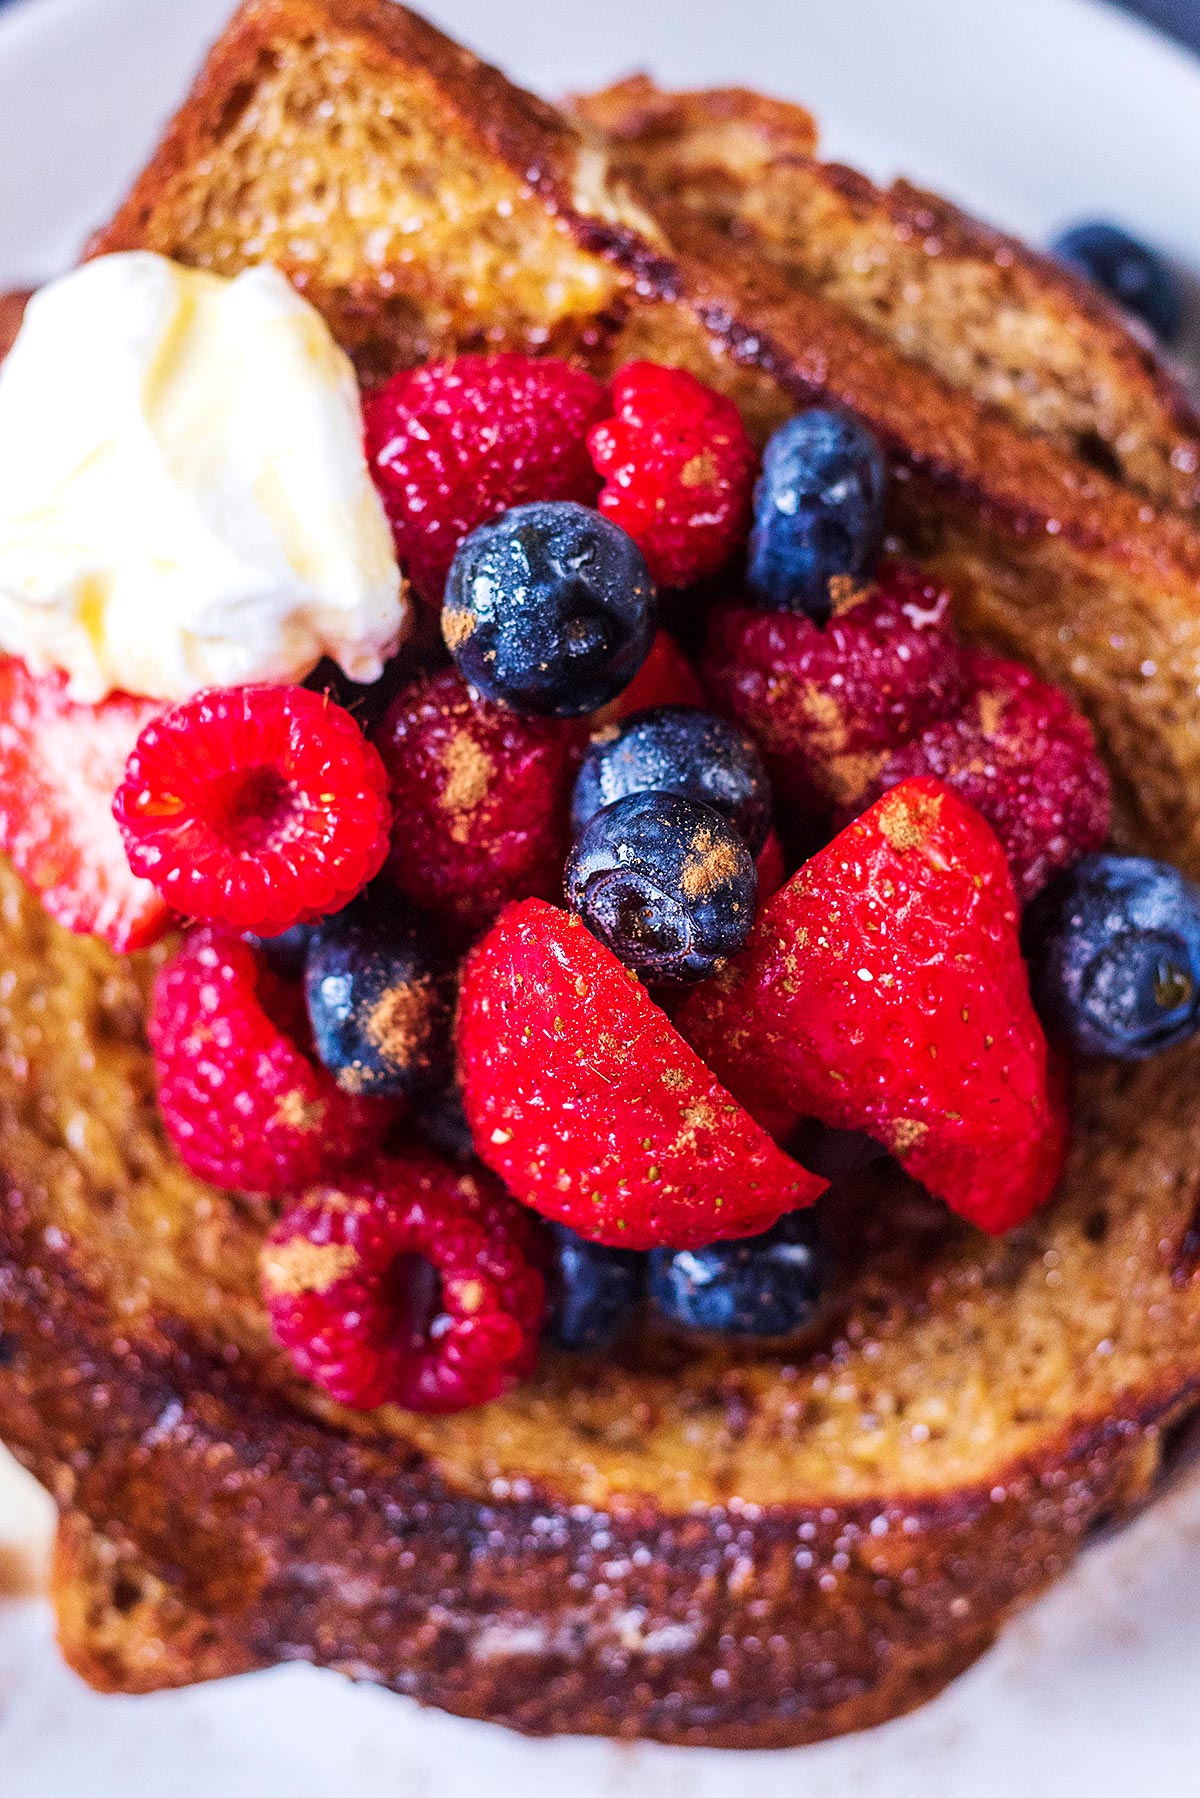 A mixture of berries on top of some French toast